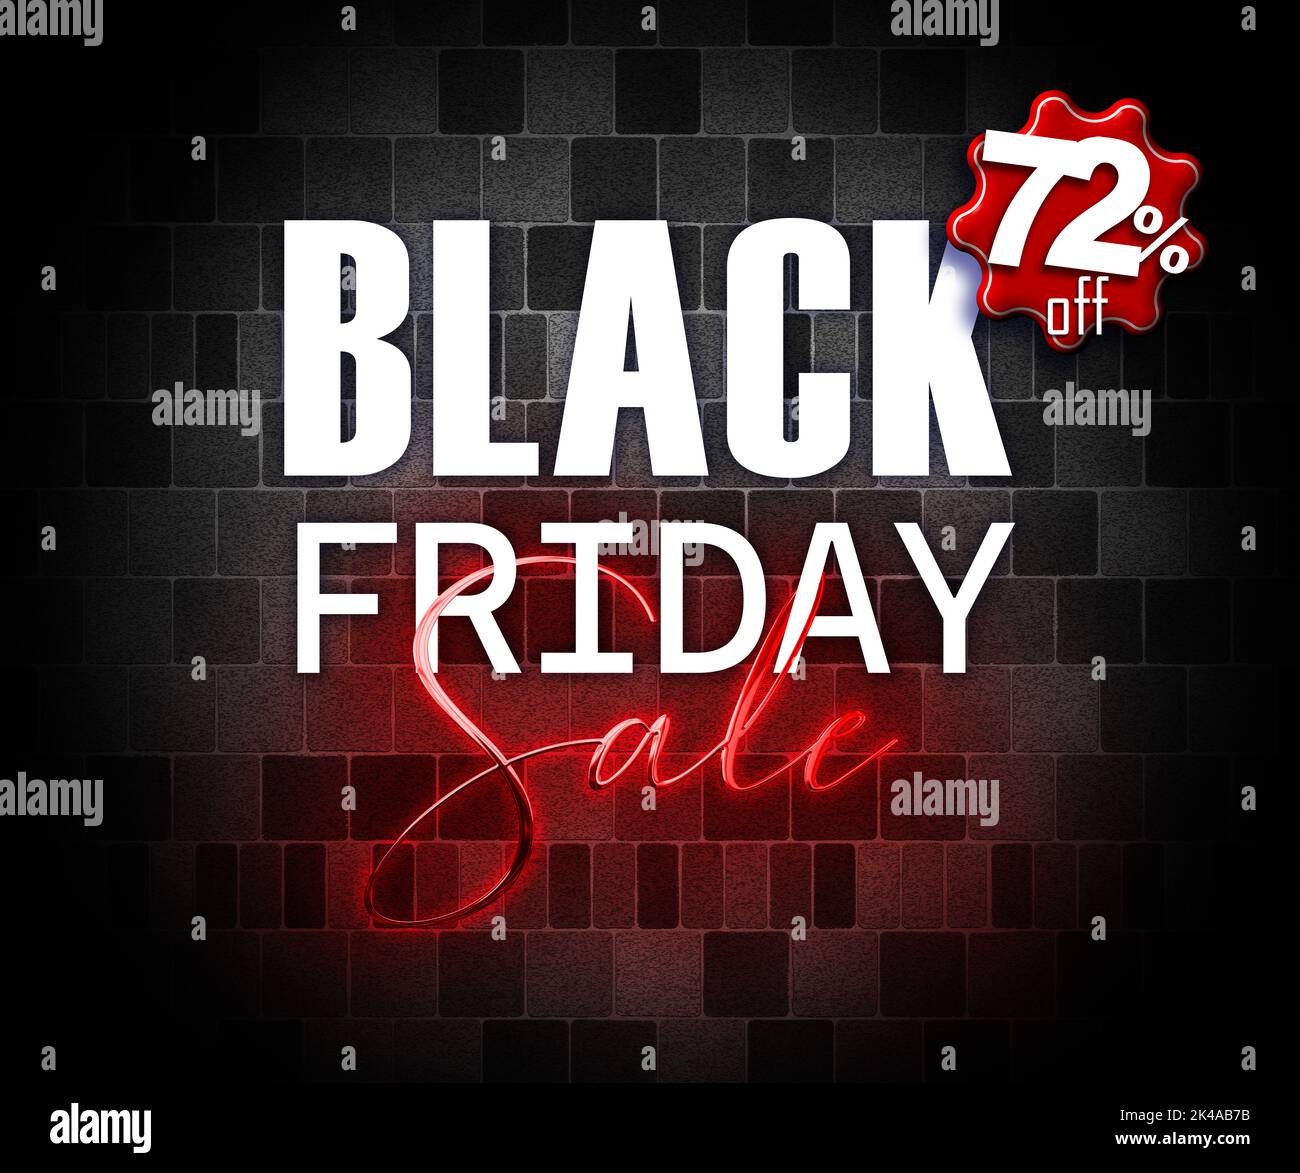 illustration with 3d elements black friday promotion banner 72 percent off sales increase Stock Photo